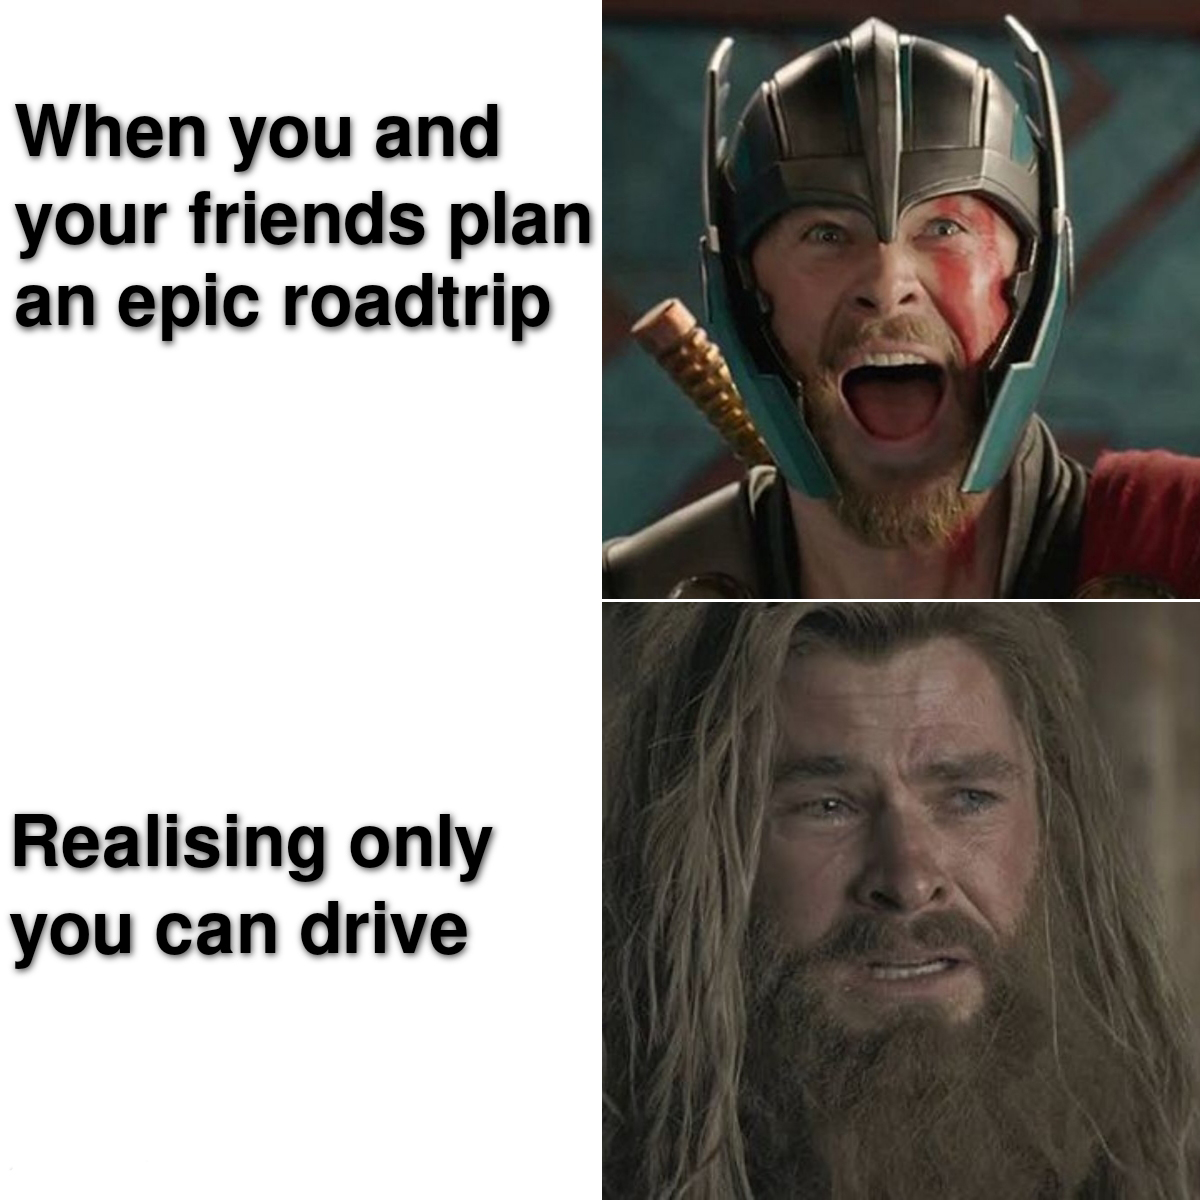 dank memes - marvel thor funny - When you and your friends plan an epic roadtrip Realising only you can drive